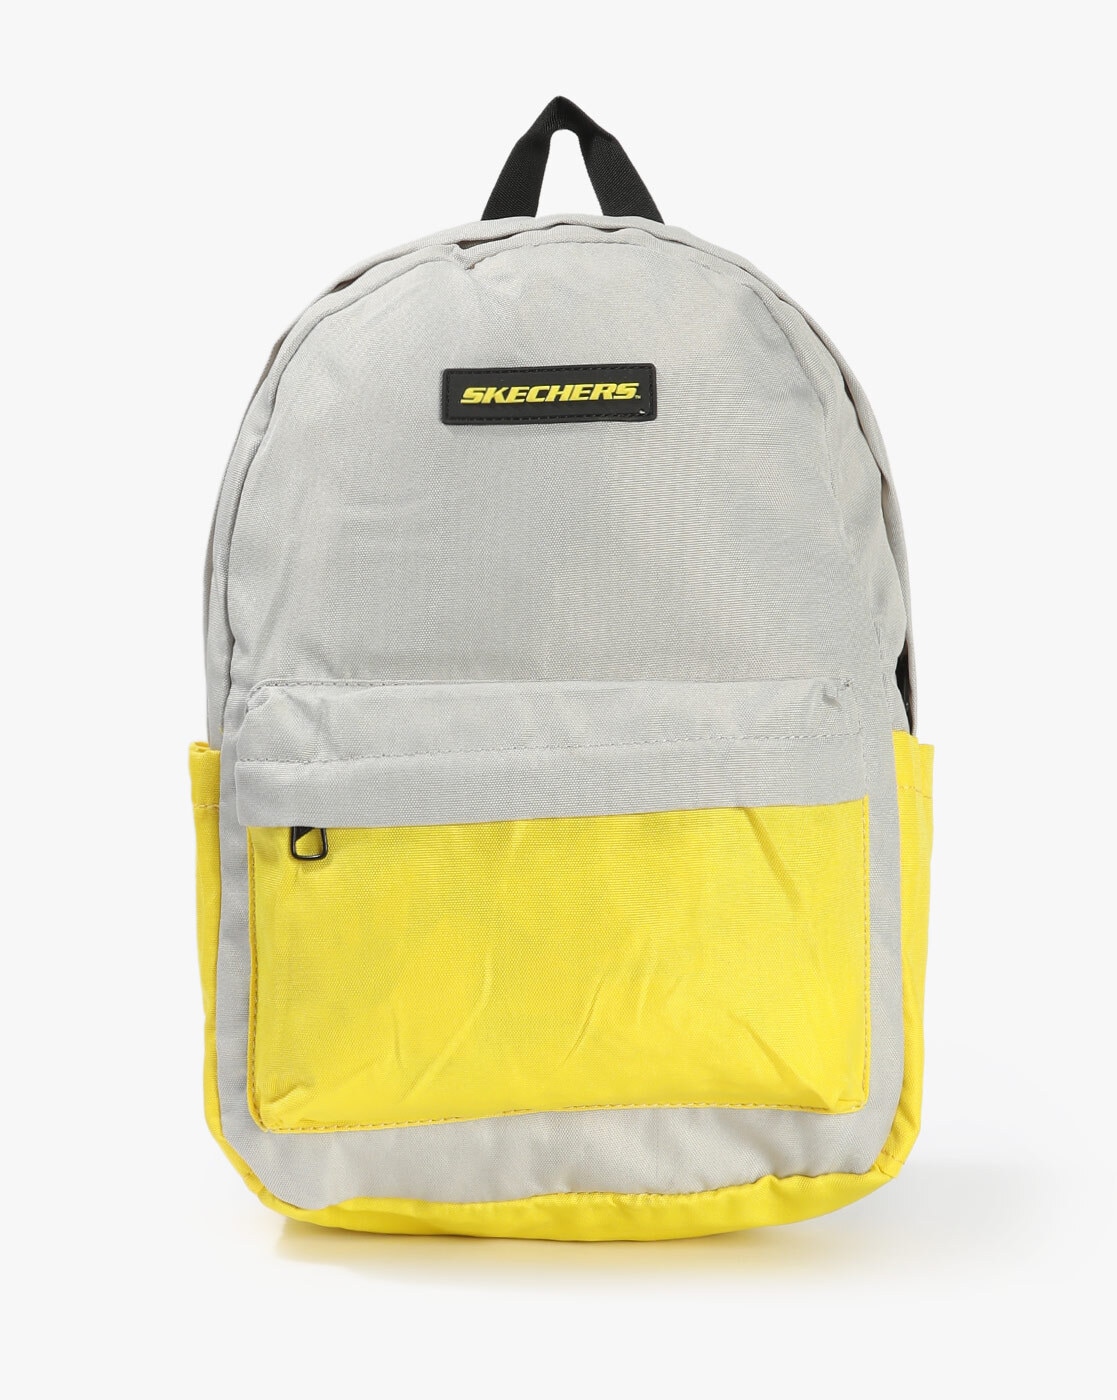 SKECHERS Unisex Bag with Twin Pockets  Grey Buy SKECHERS Unisex Bag with  Twin Pockets  Grey Online at Best Price in India  Nykaa